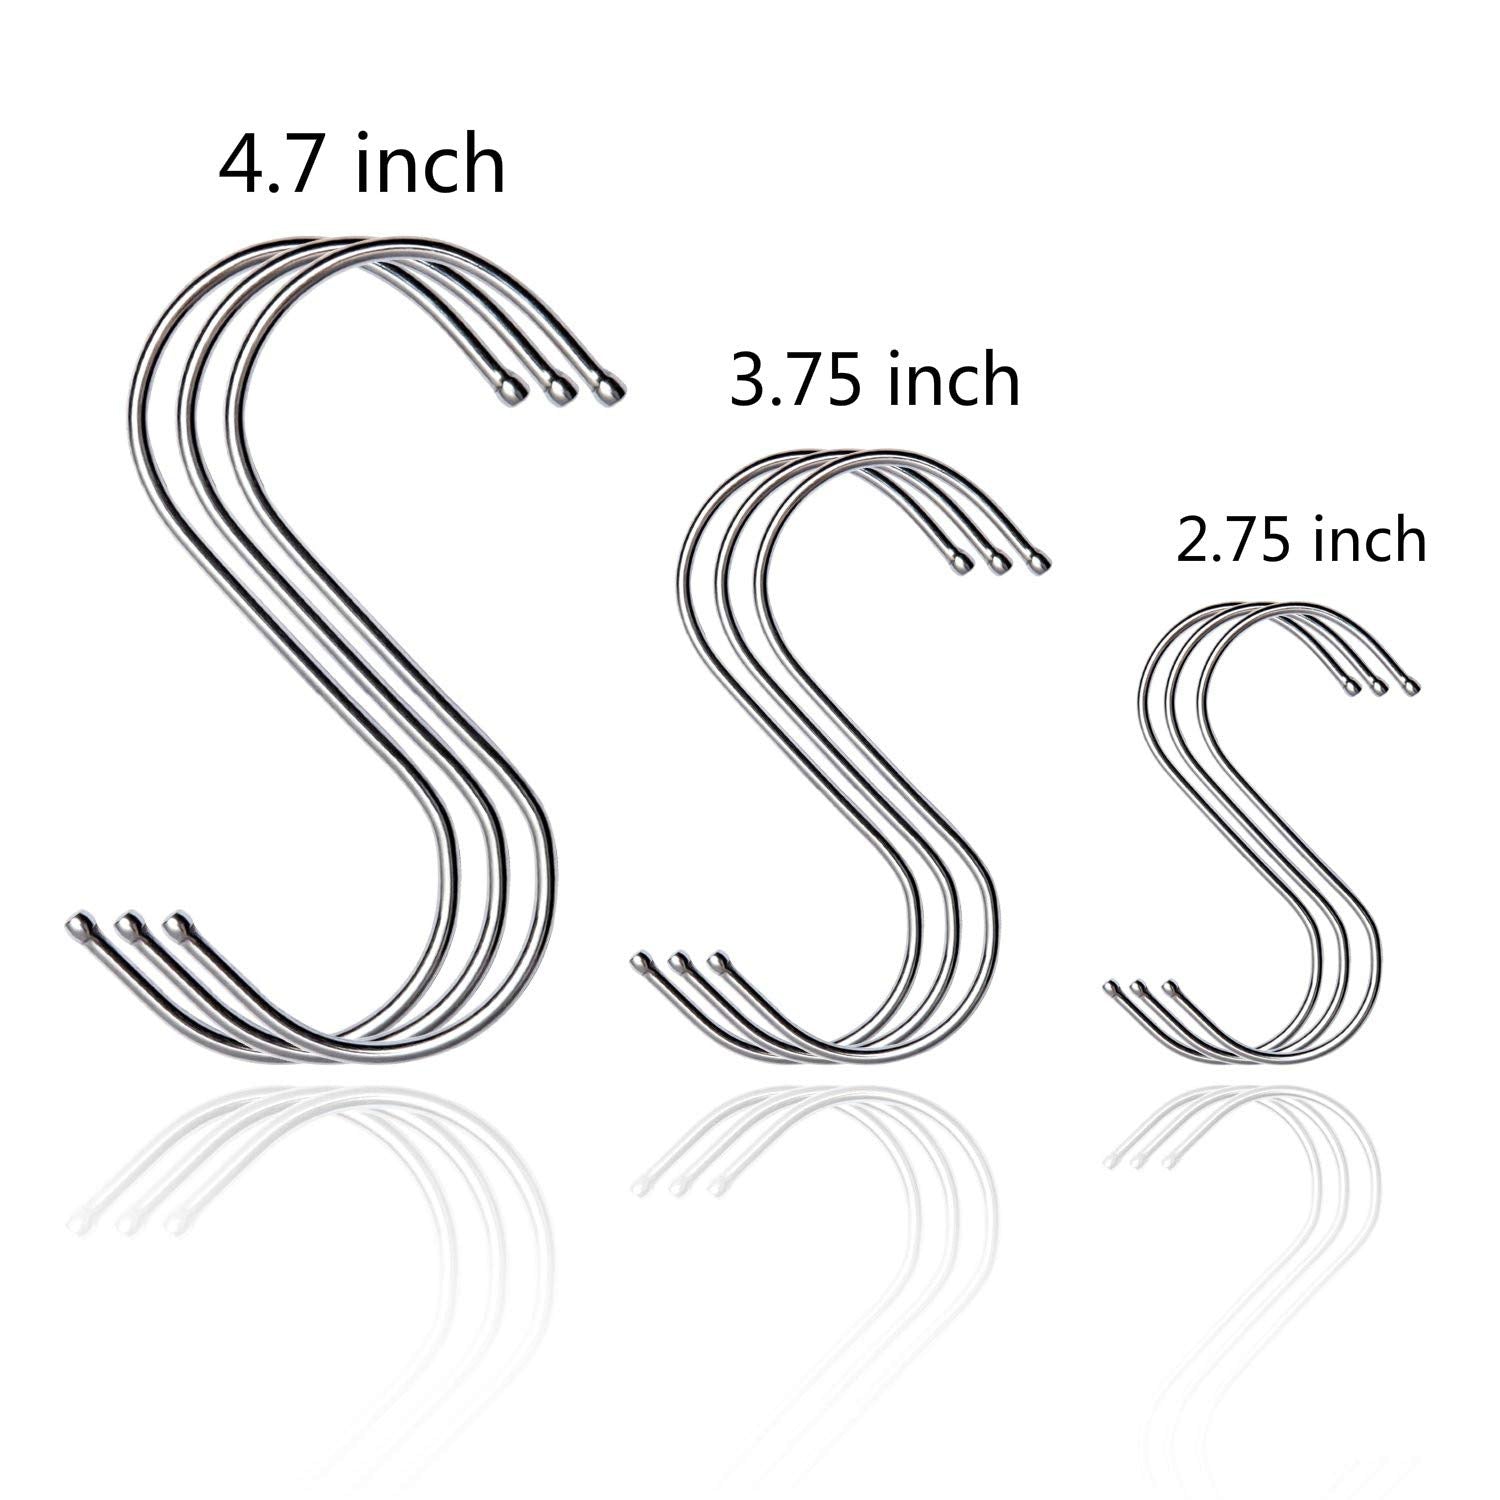 4.70 inch S Hooks Large Heavy Duty Stainless - Steel S Shaped Hooks Polished Brushed Metal Round Hanging Hooks Installation Designed Rganizing Utensils Kitchen Tools for Pots Pans Etc (Silver)